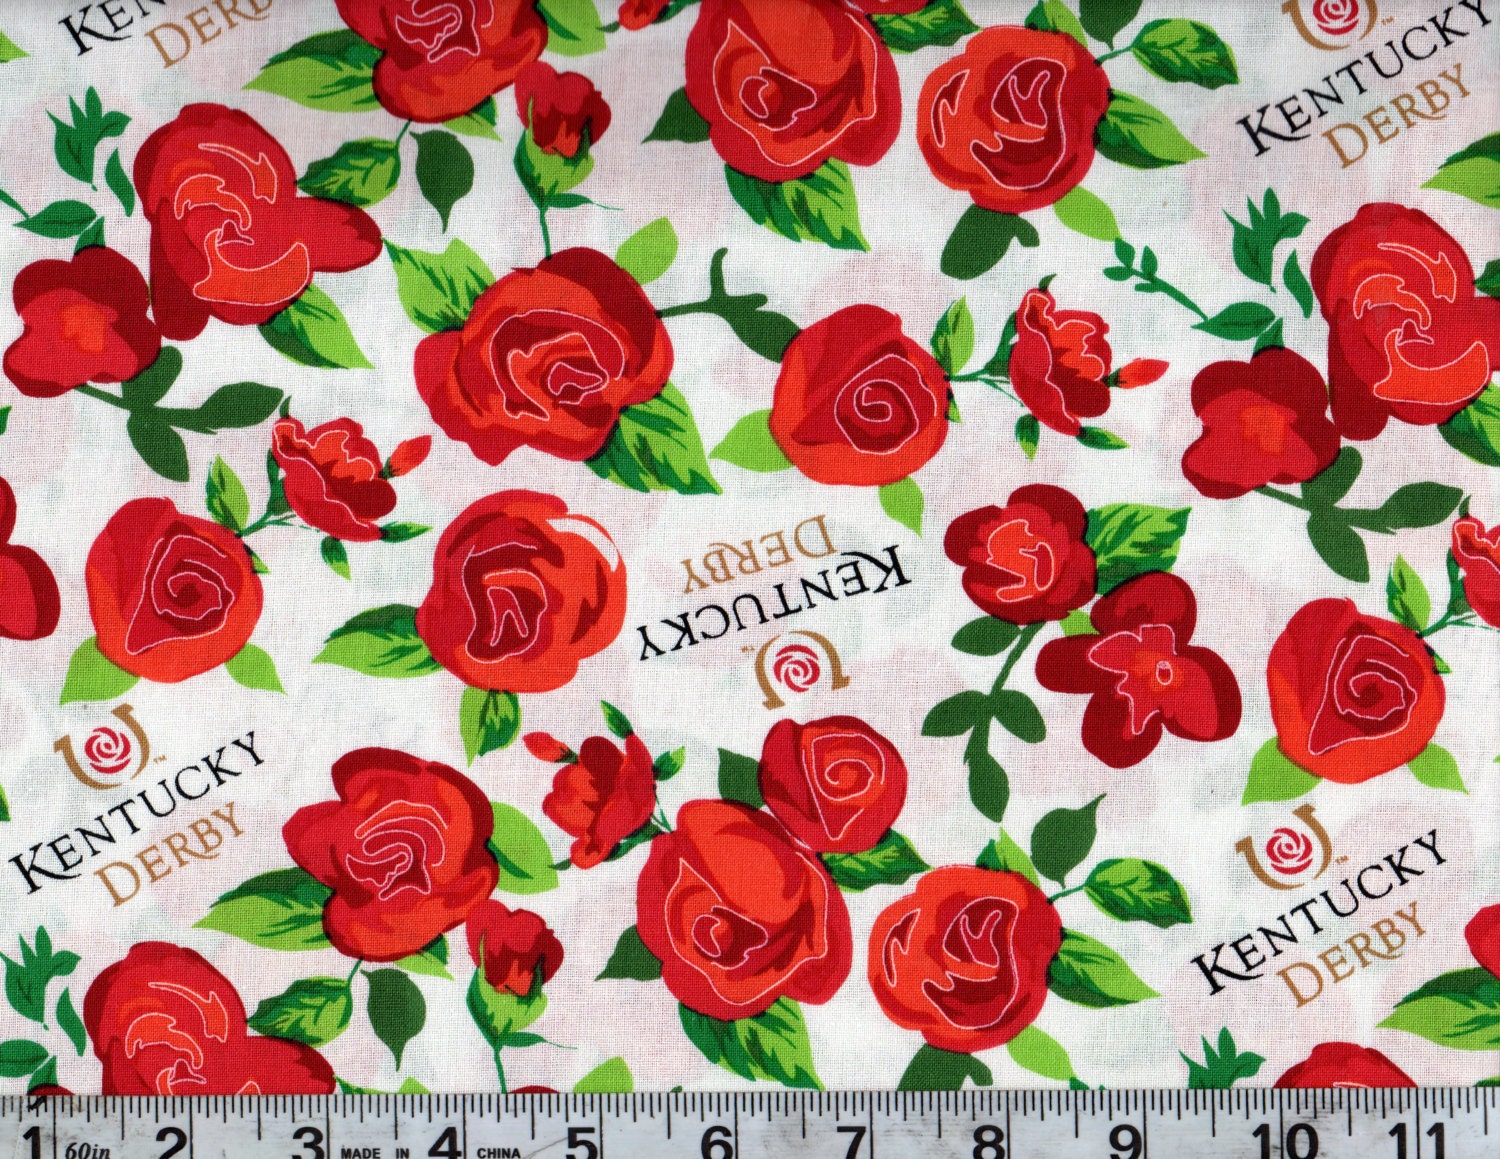 Kentucky Derby Winners Circle Roses Cotton Fabric By the Yard